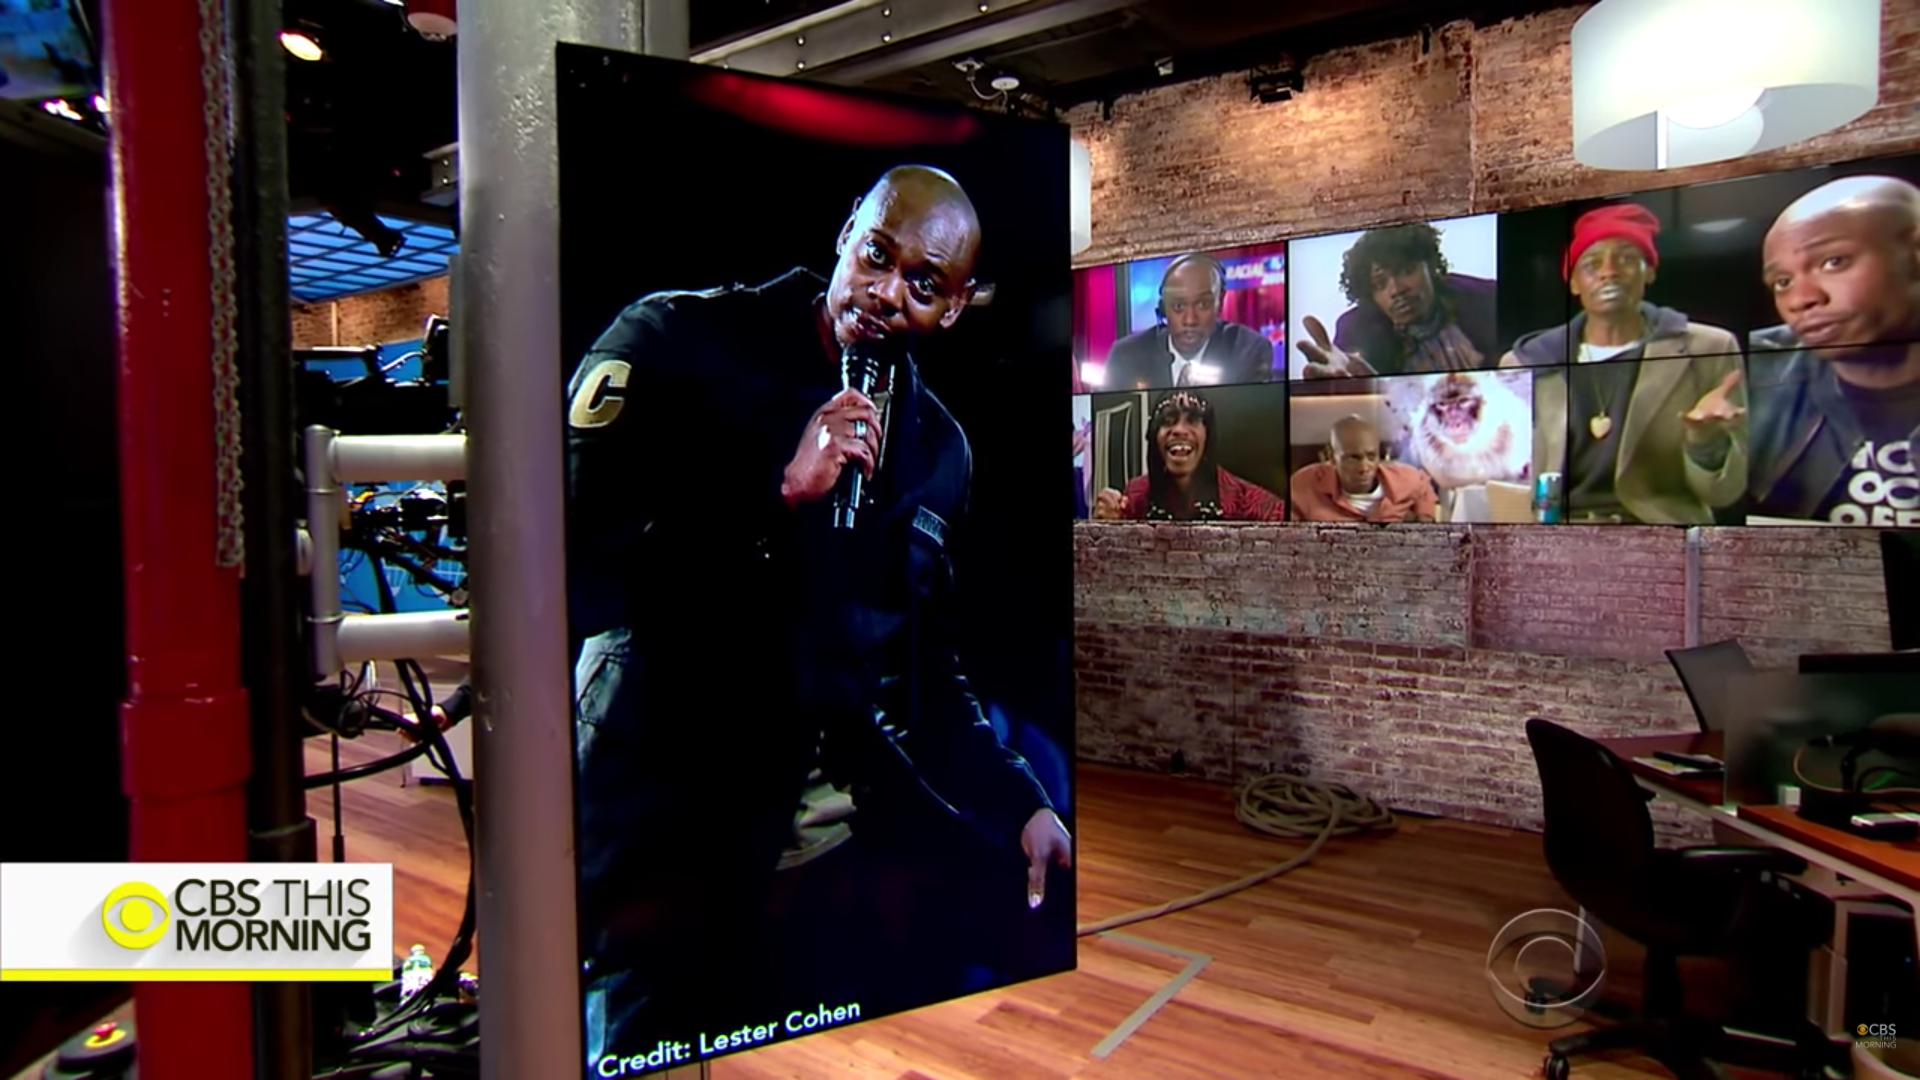 Dave Chappelle on CBS This Morning. Photo by: CBS / YouTube